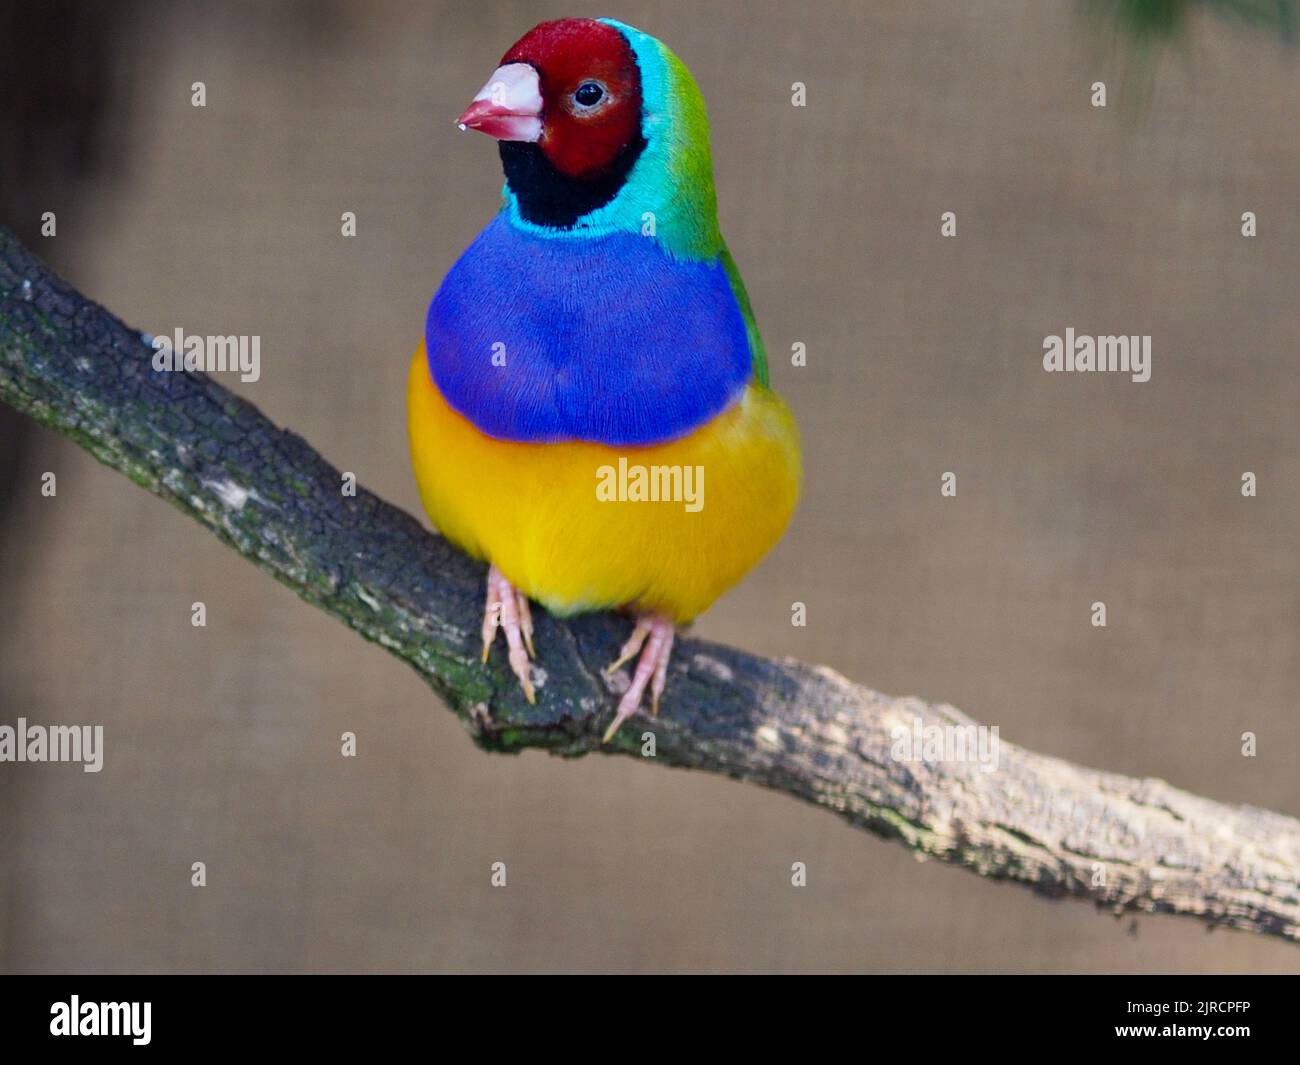 A closeup portrait of a eye-catching splendid male Gouldian Finch with dazzling multicolored plumage. Stock Photo